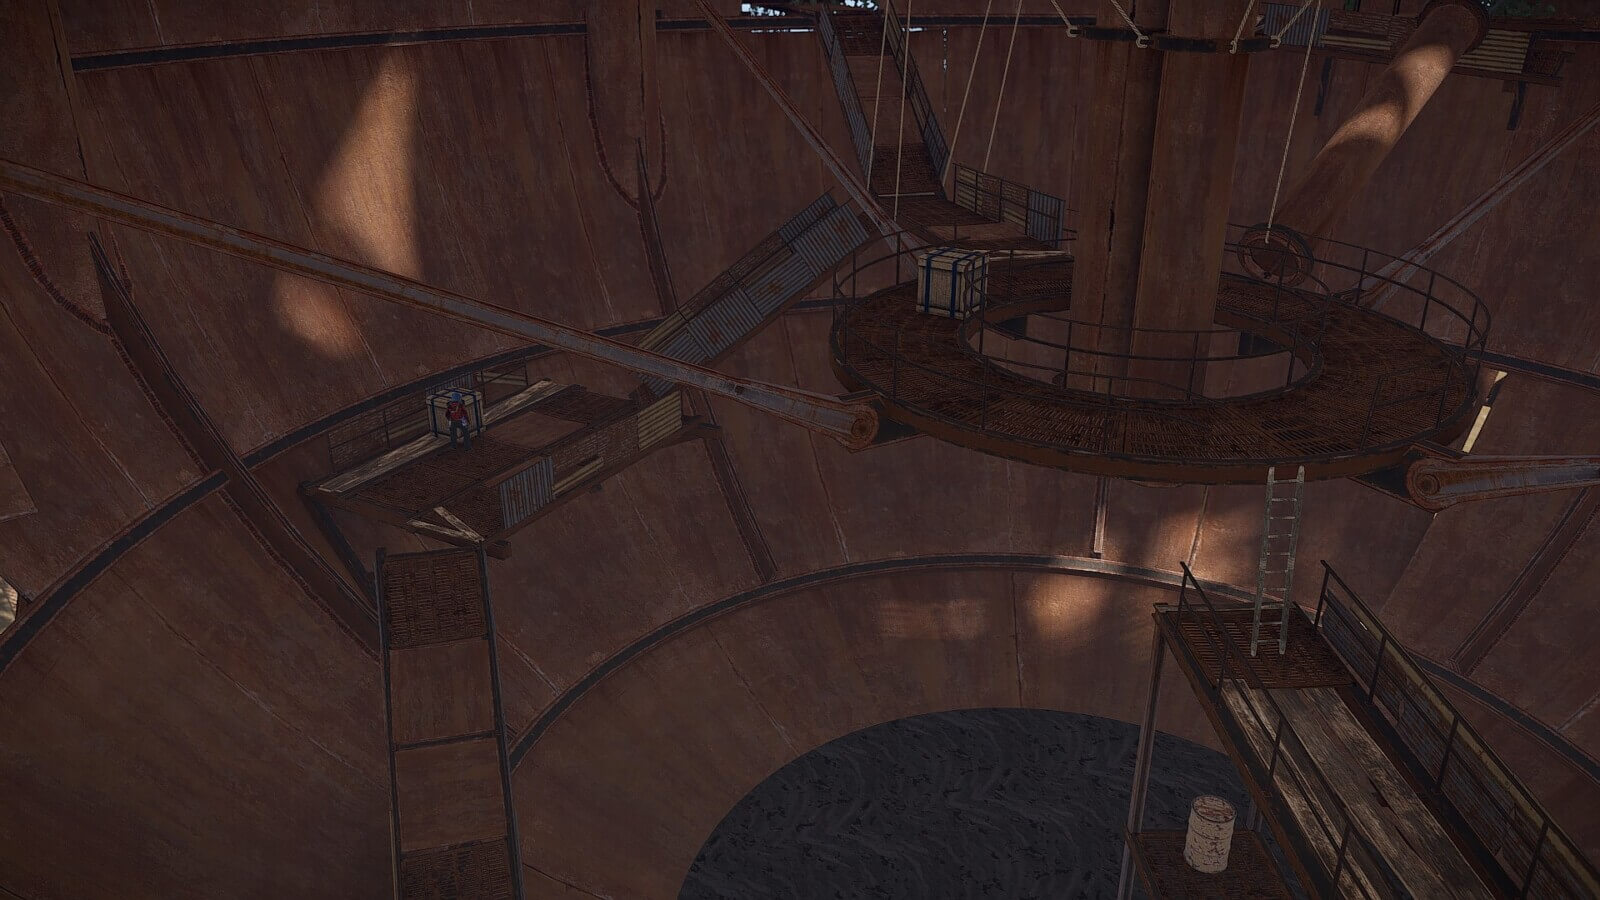 Once you enter the Sphere Tank there are several locations for brown crate spawns and one normal barrel in a rather riskier location if you wish to attempt it.